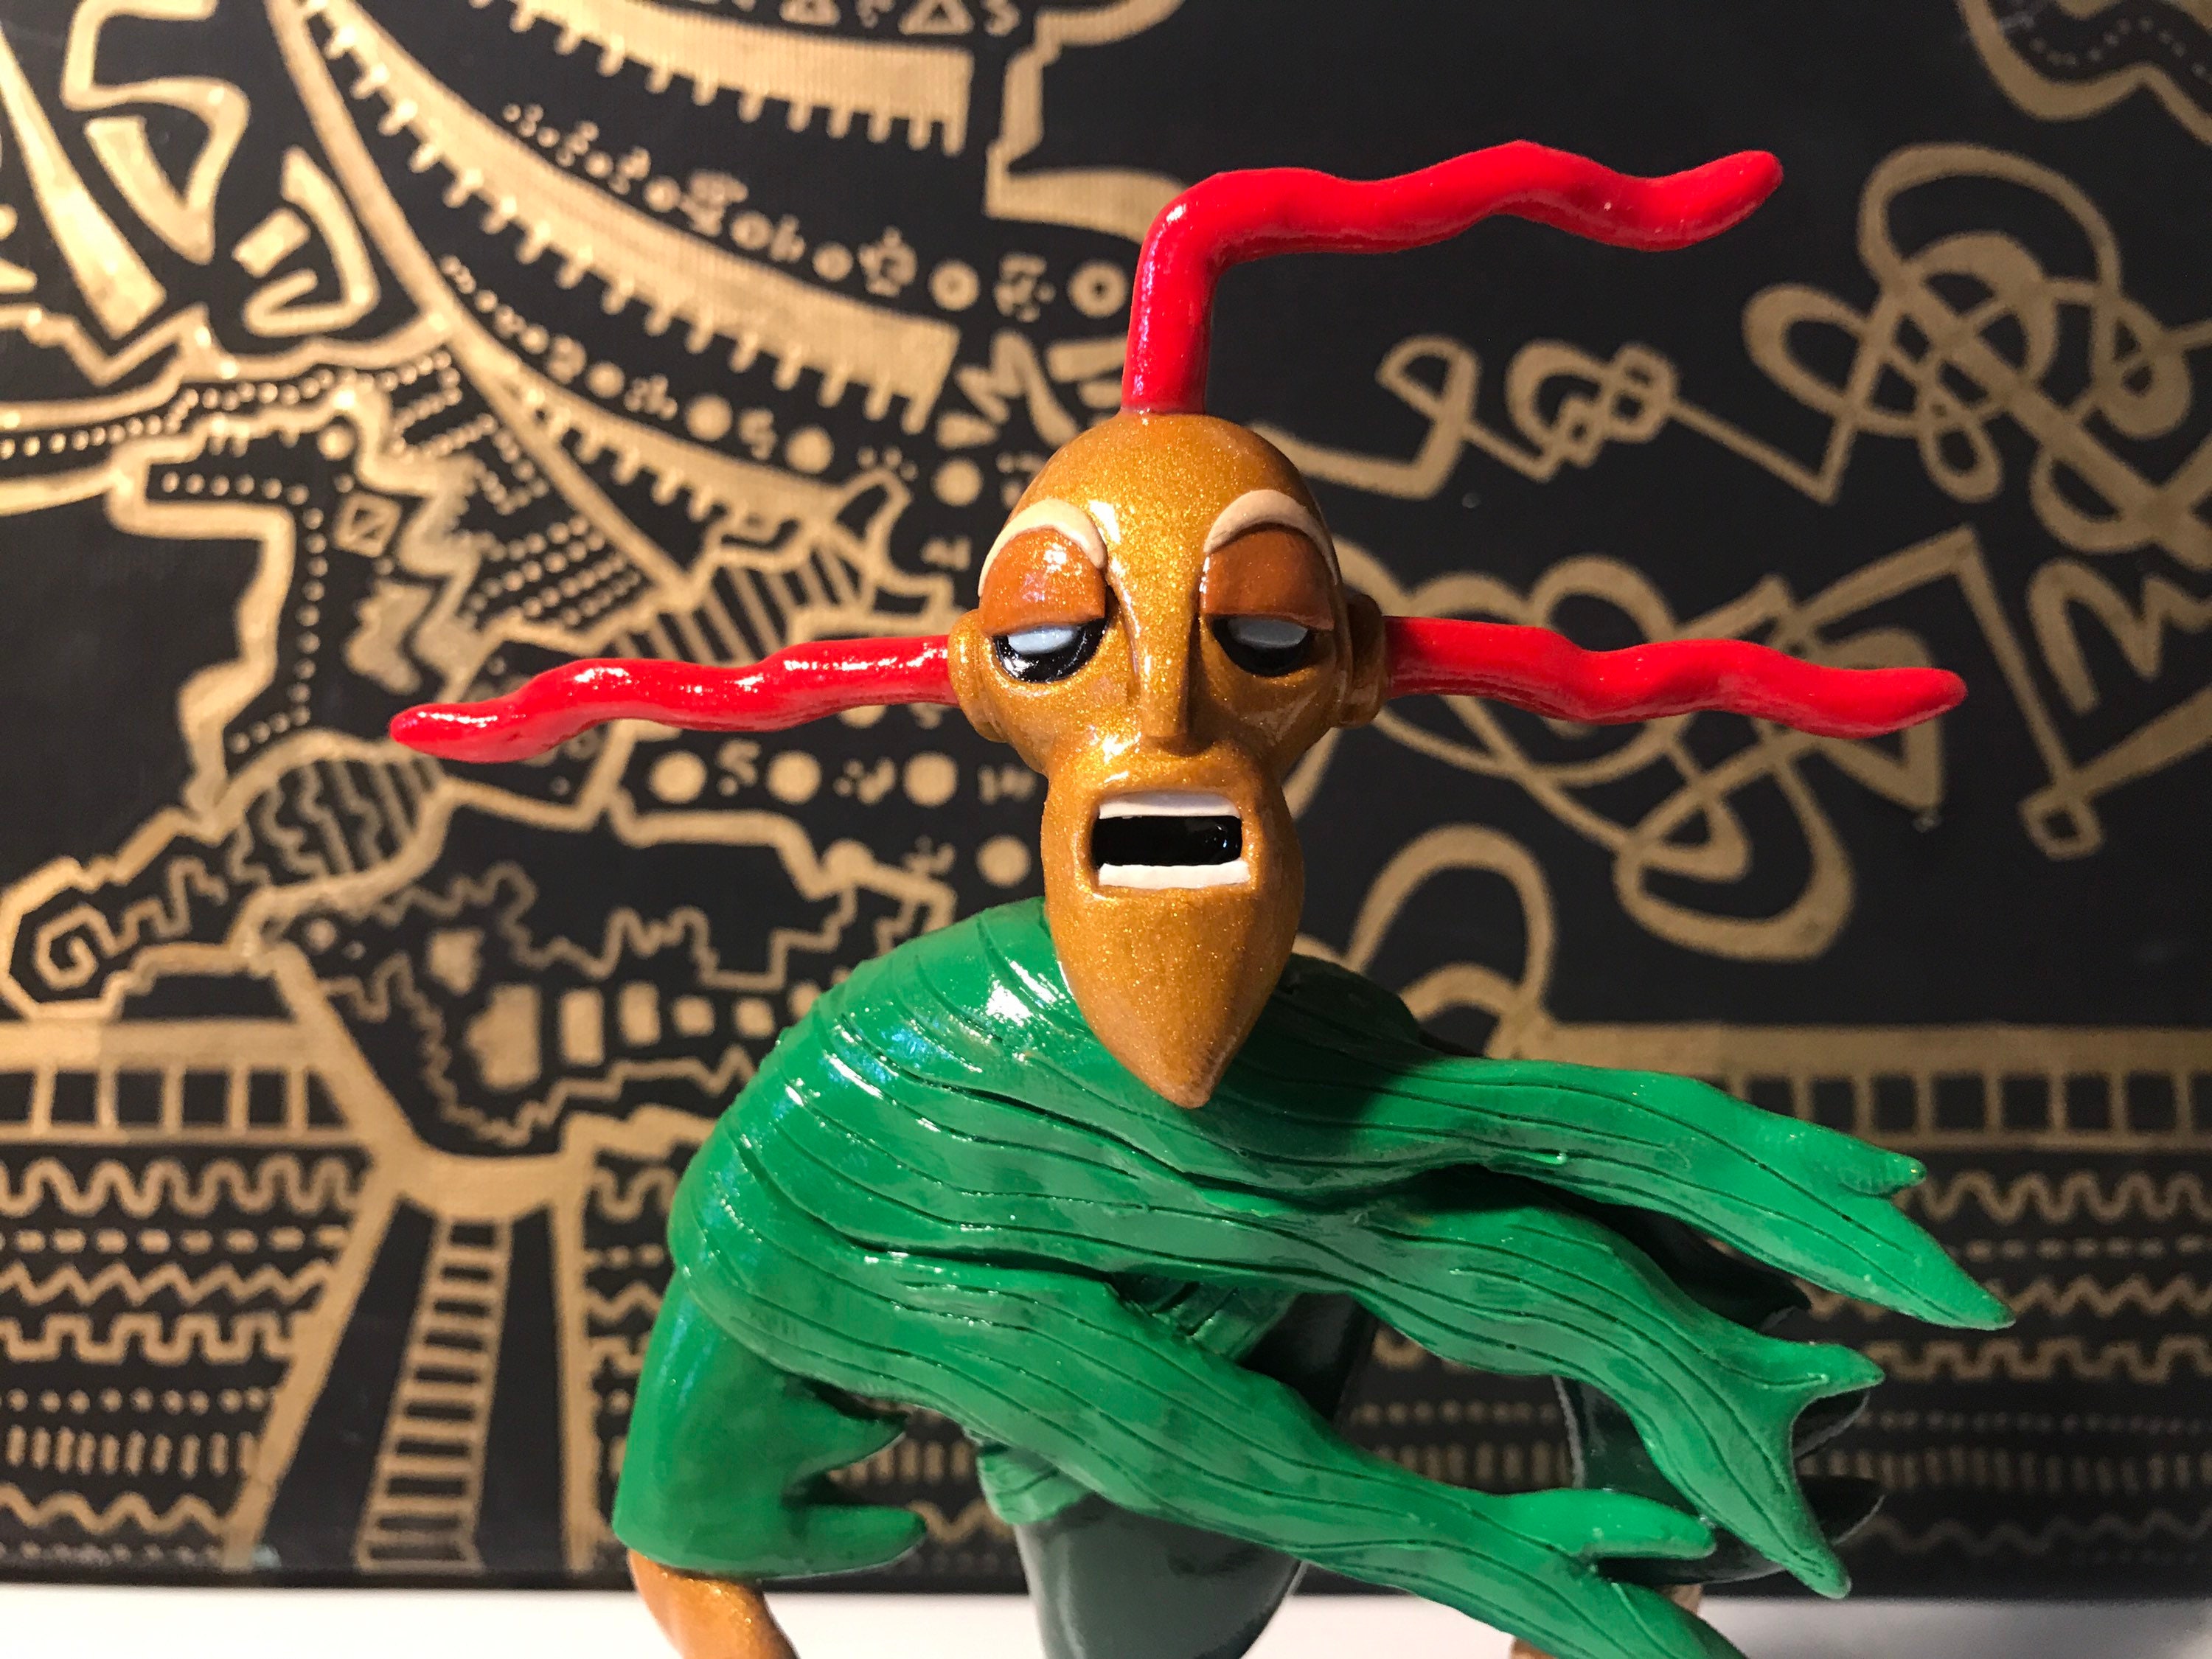 King Ramses Unofficial Hand-Made Sculpture Courage the Cowardly Dog